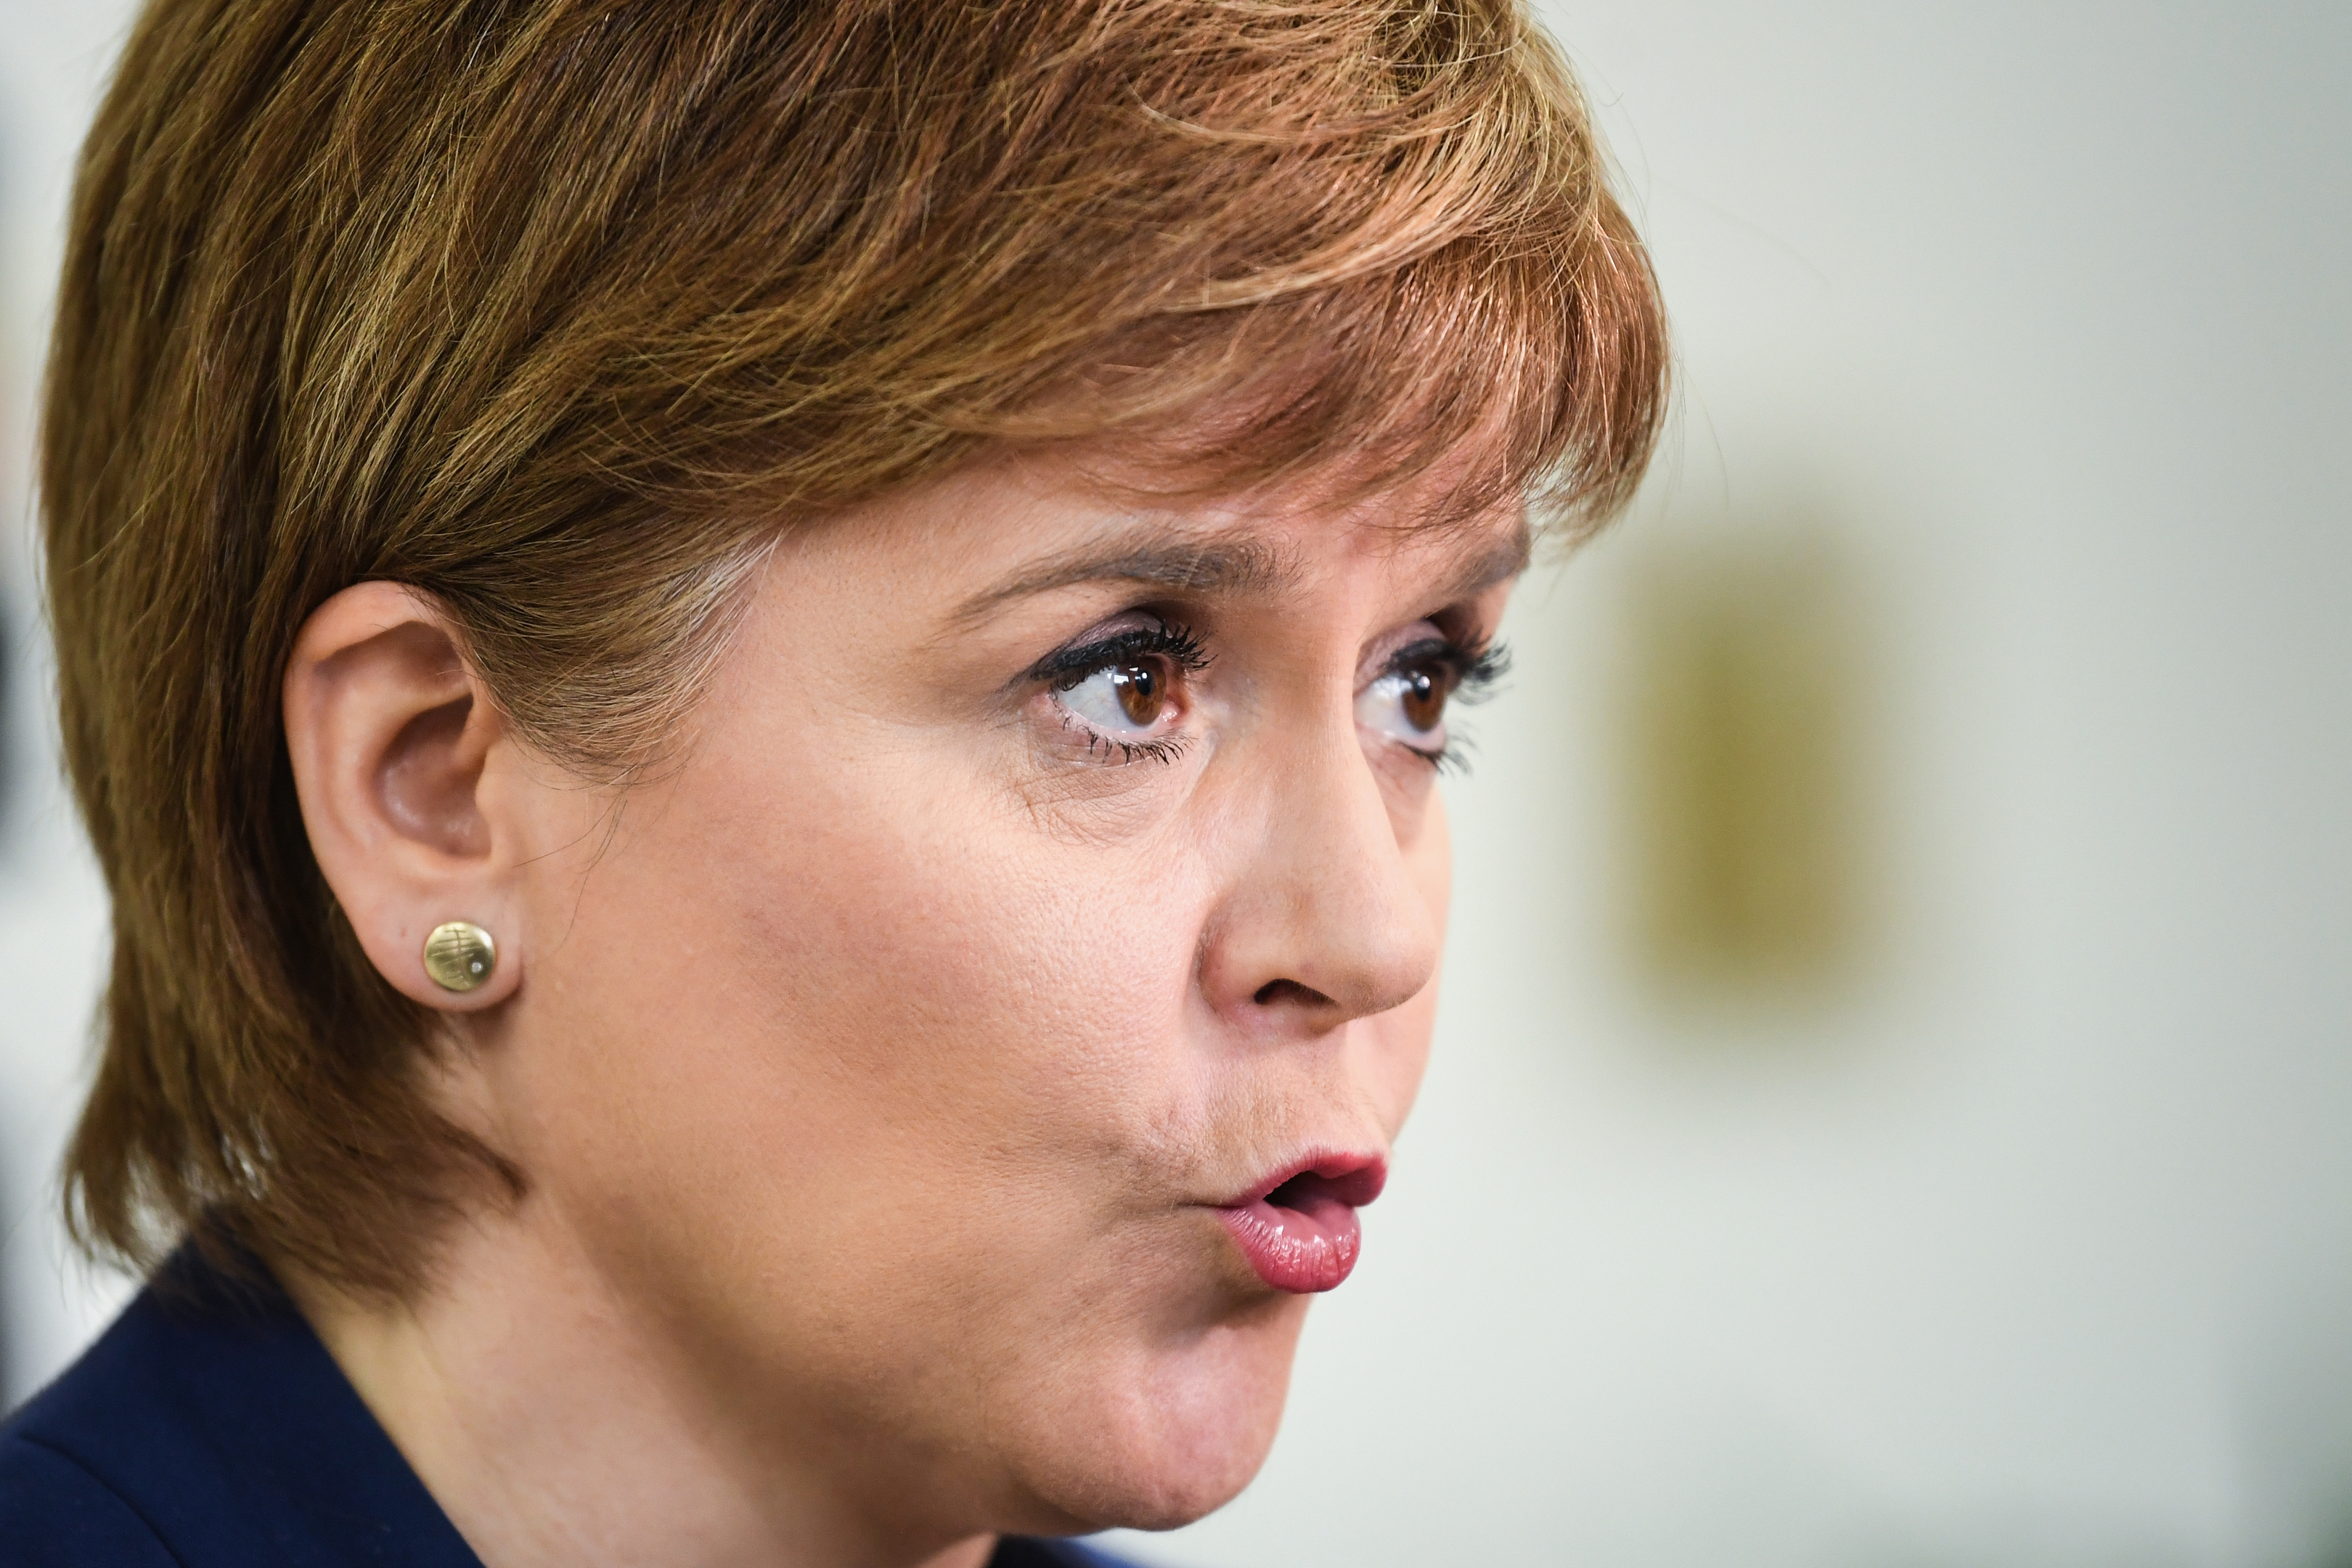 Nicola Sturgeon has responded to the latest developments in the Brexit negotiations (Jeff J Mitchell - WPA Pool/Getty Images)